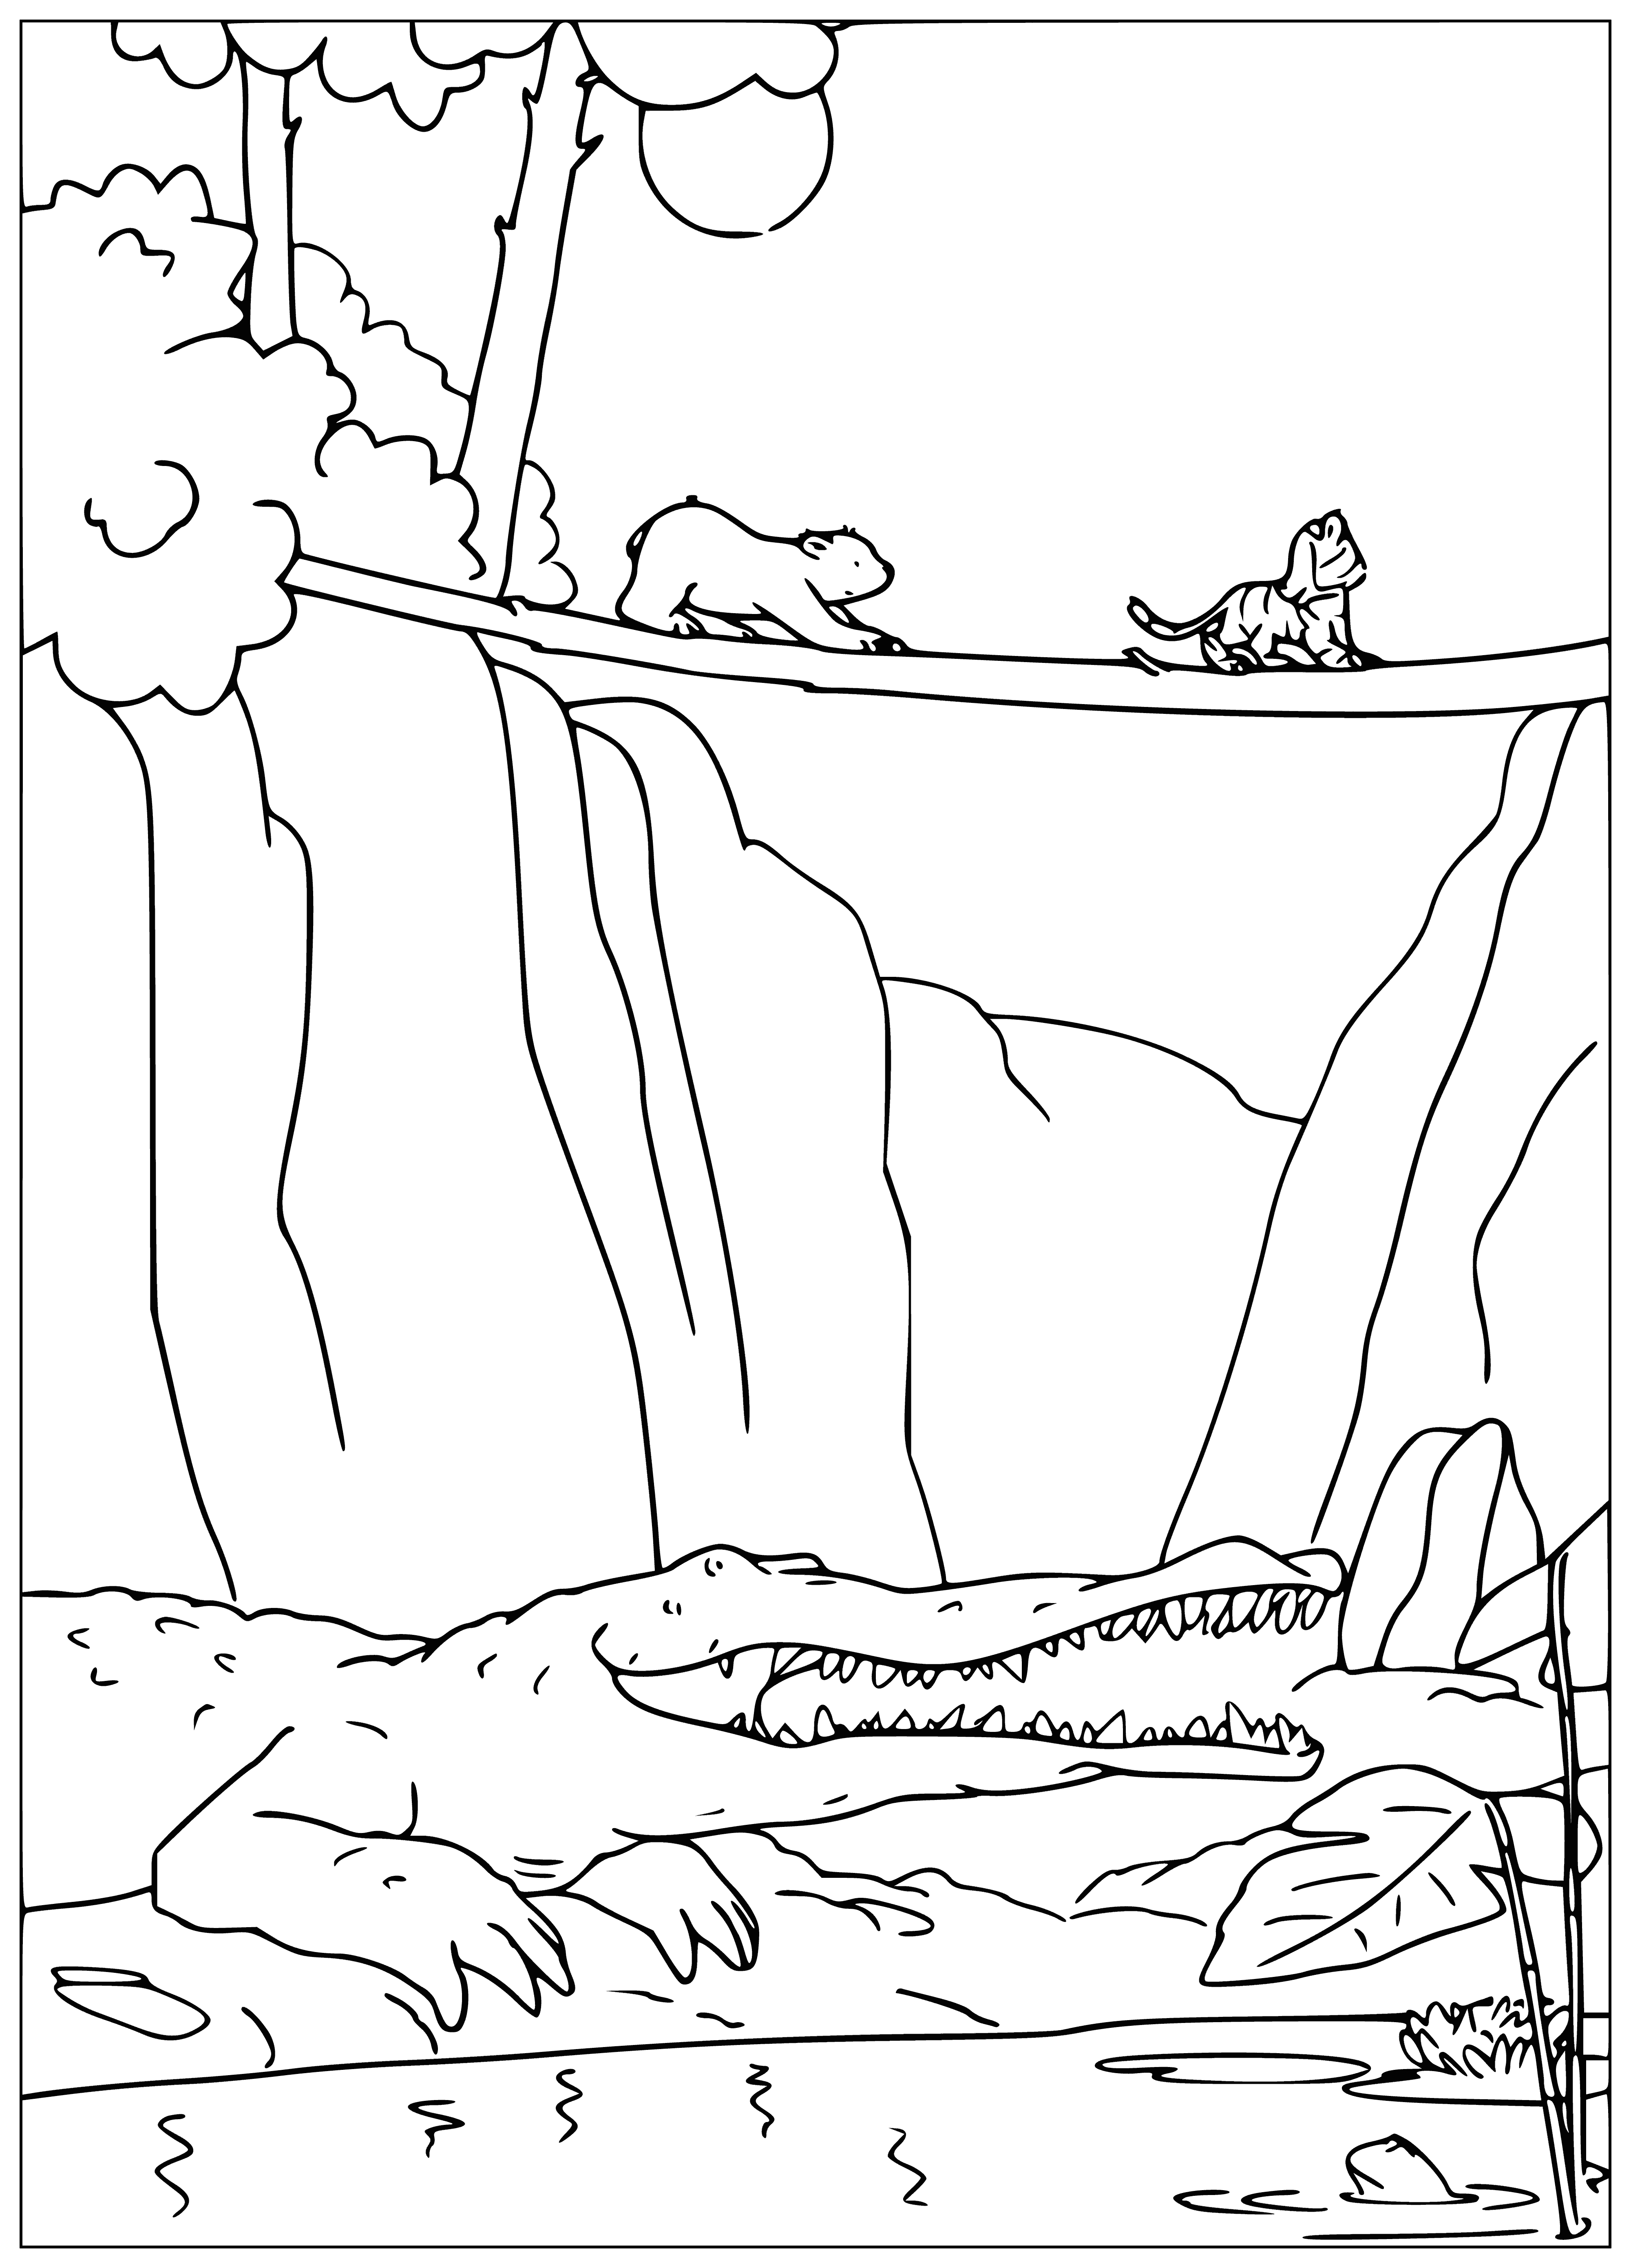 On the bridge coloring page